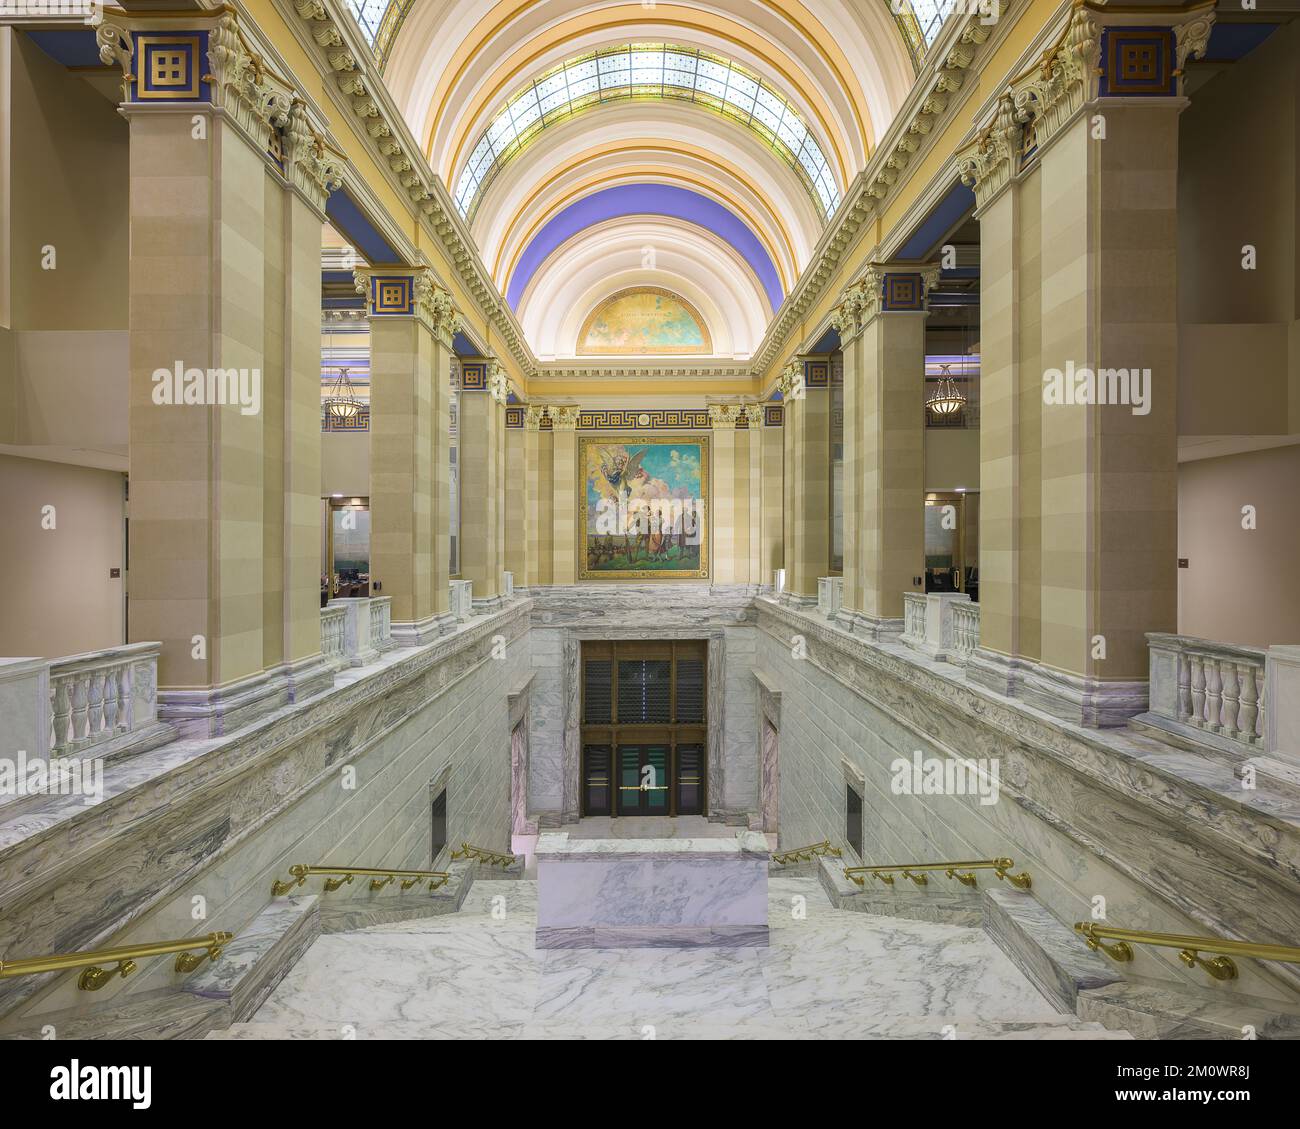 Grand staircase and Pro Patria oil painting in the Oklahoma State Capitol building in Oklahoma City, Oklahoma Stock Photo